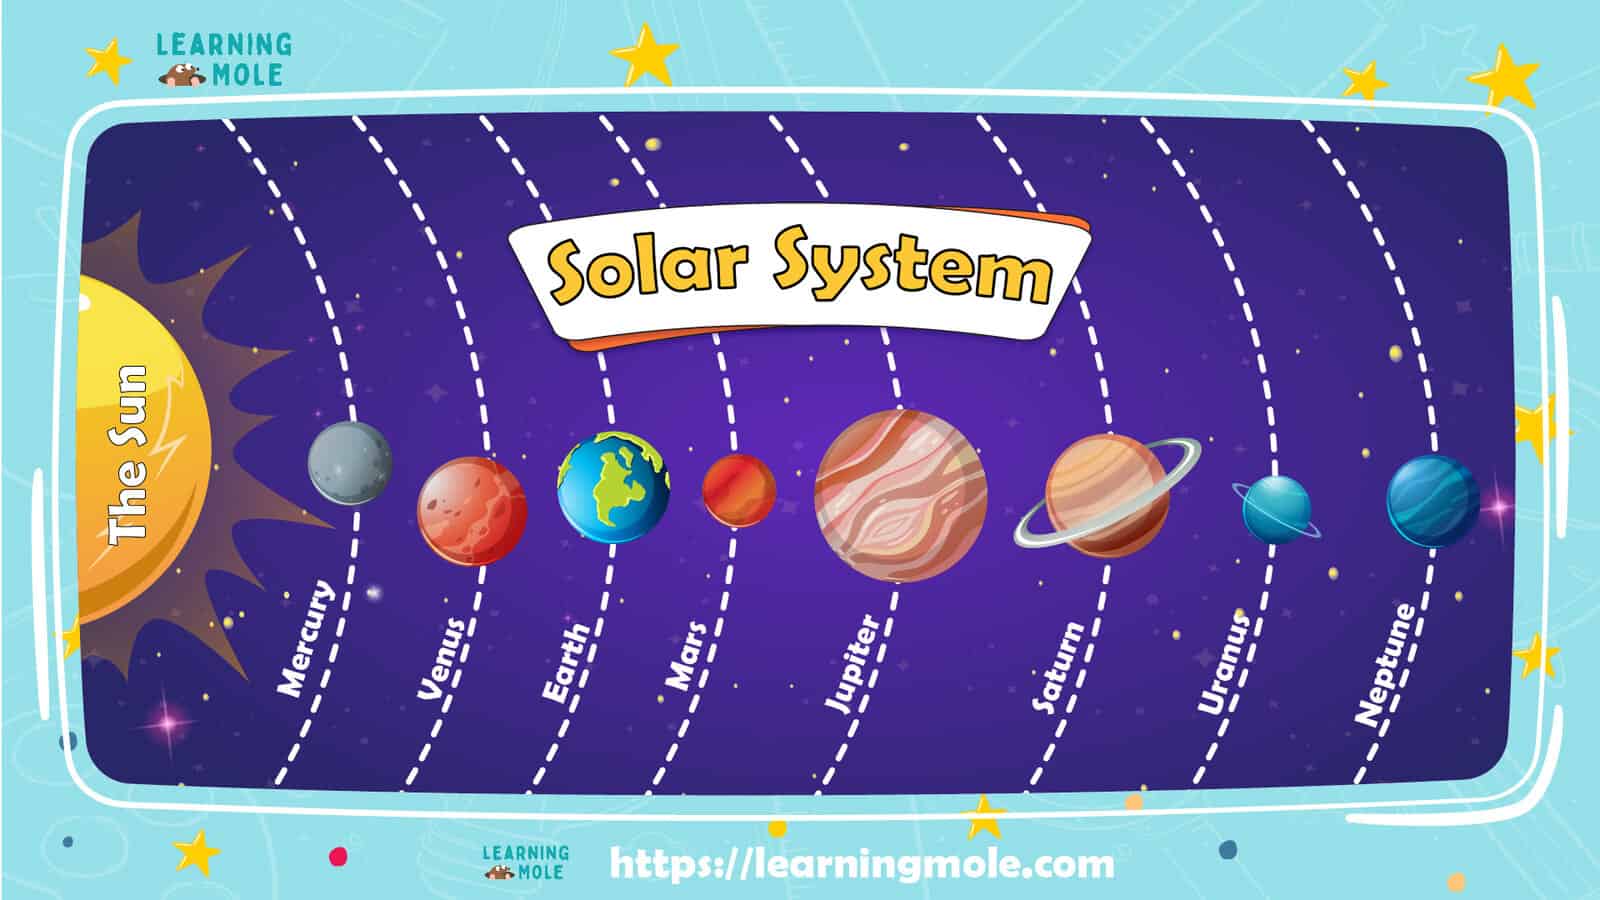 Solar System,Solar System Facts,Facts,Space,Adventure,Milky Way LearningMole